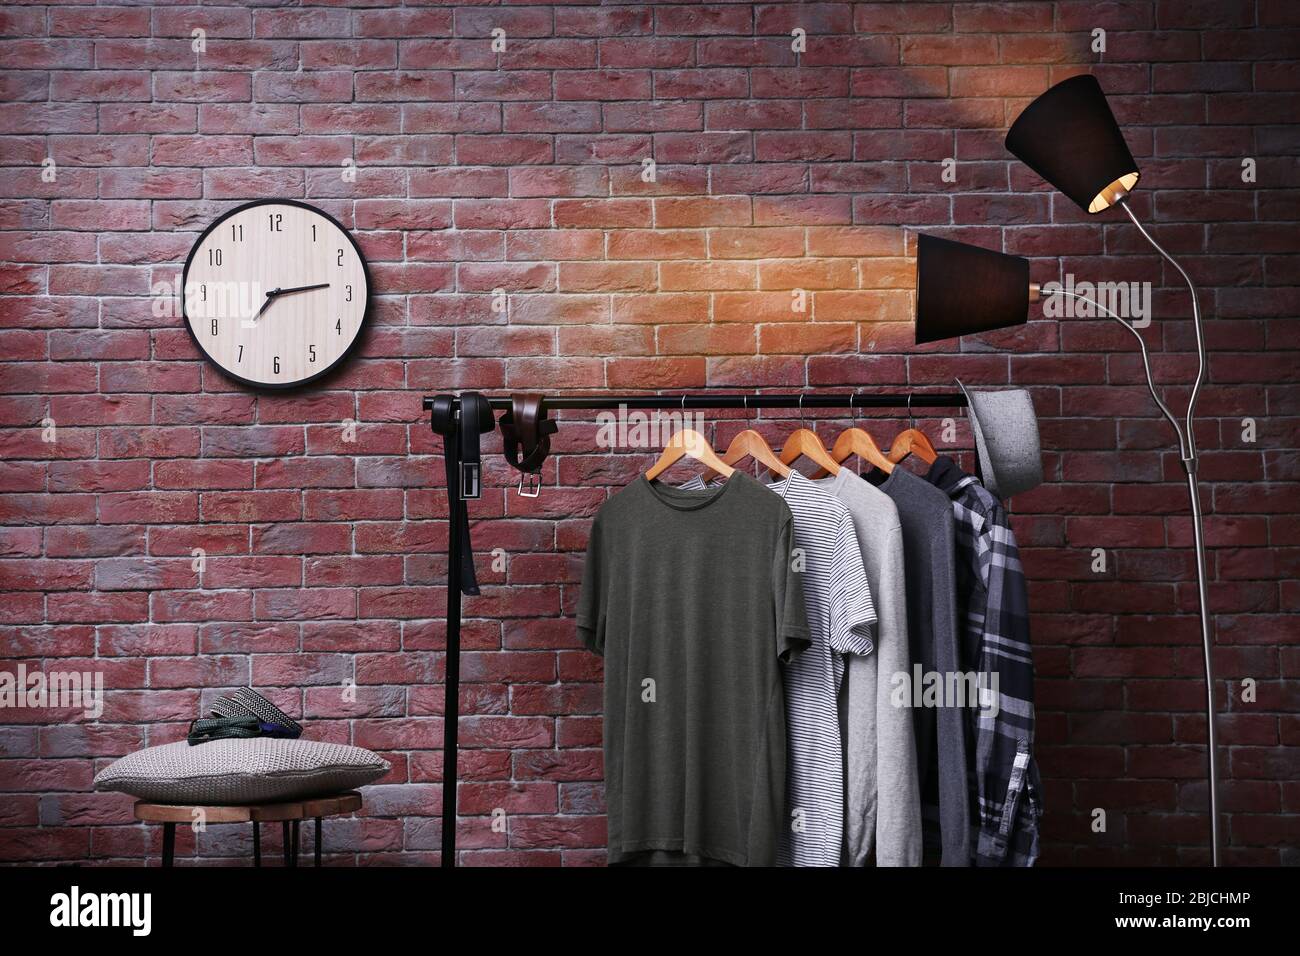 Casual stylish shirts on hanger stand in room Stock Photo